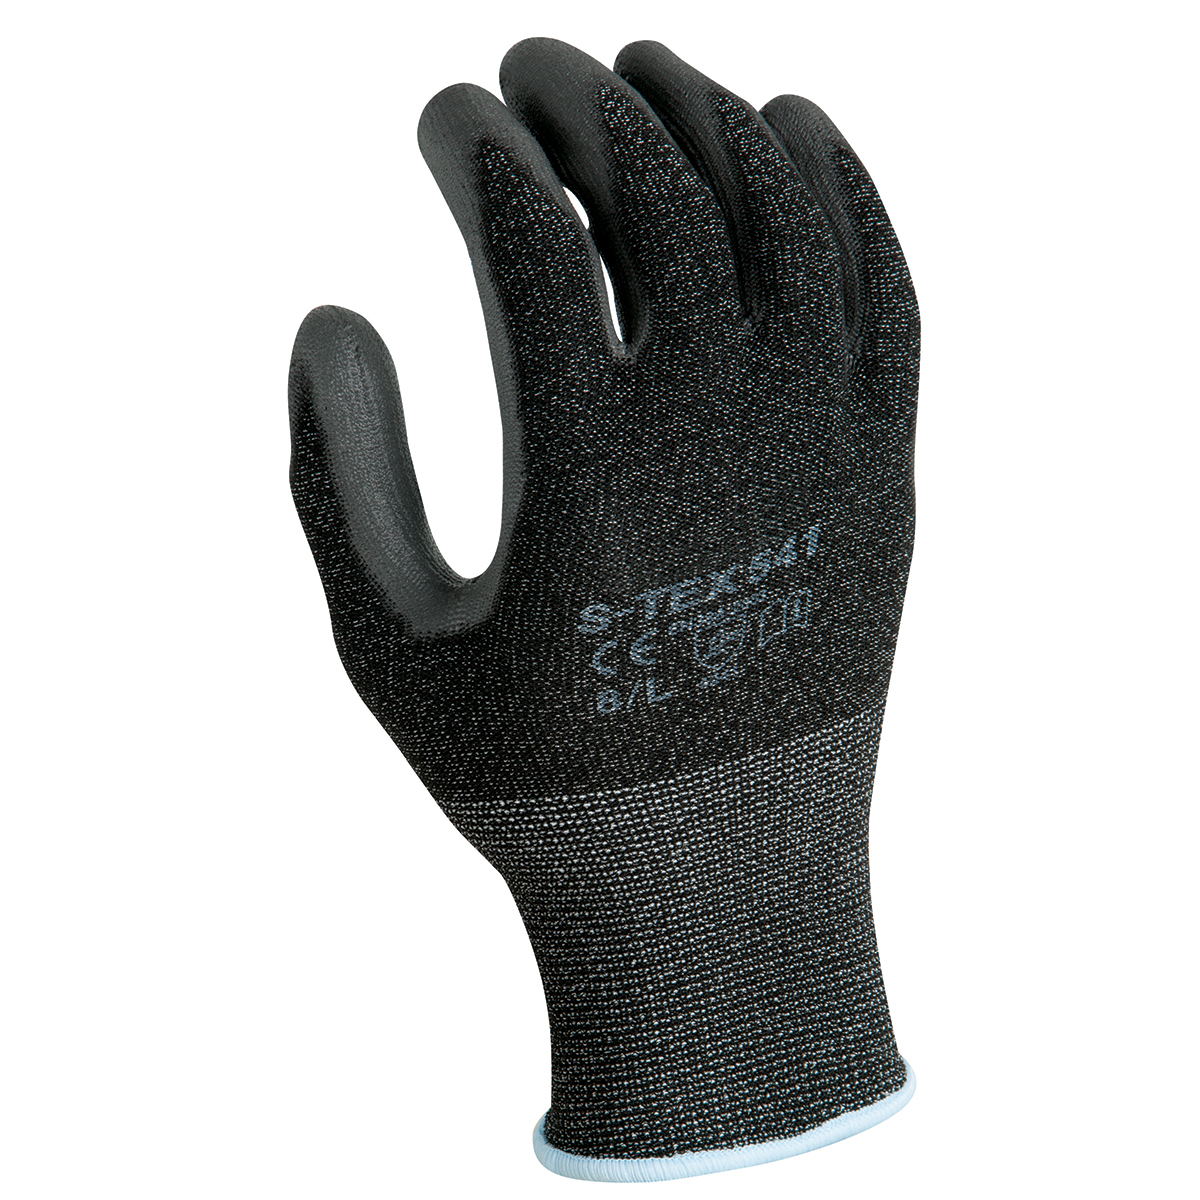 SHOWA® S-TEX® 541 13 Gauge Polyester And Hagane Coil® And Stainless Steel Cut Resistant Gloves With Polyurethane Coating